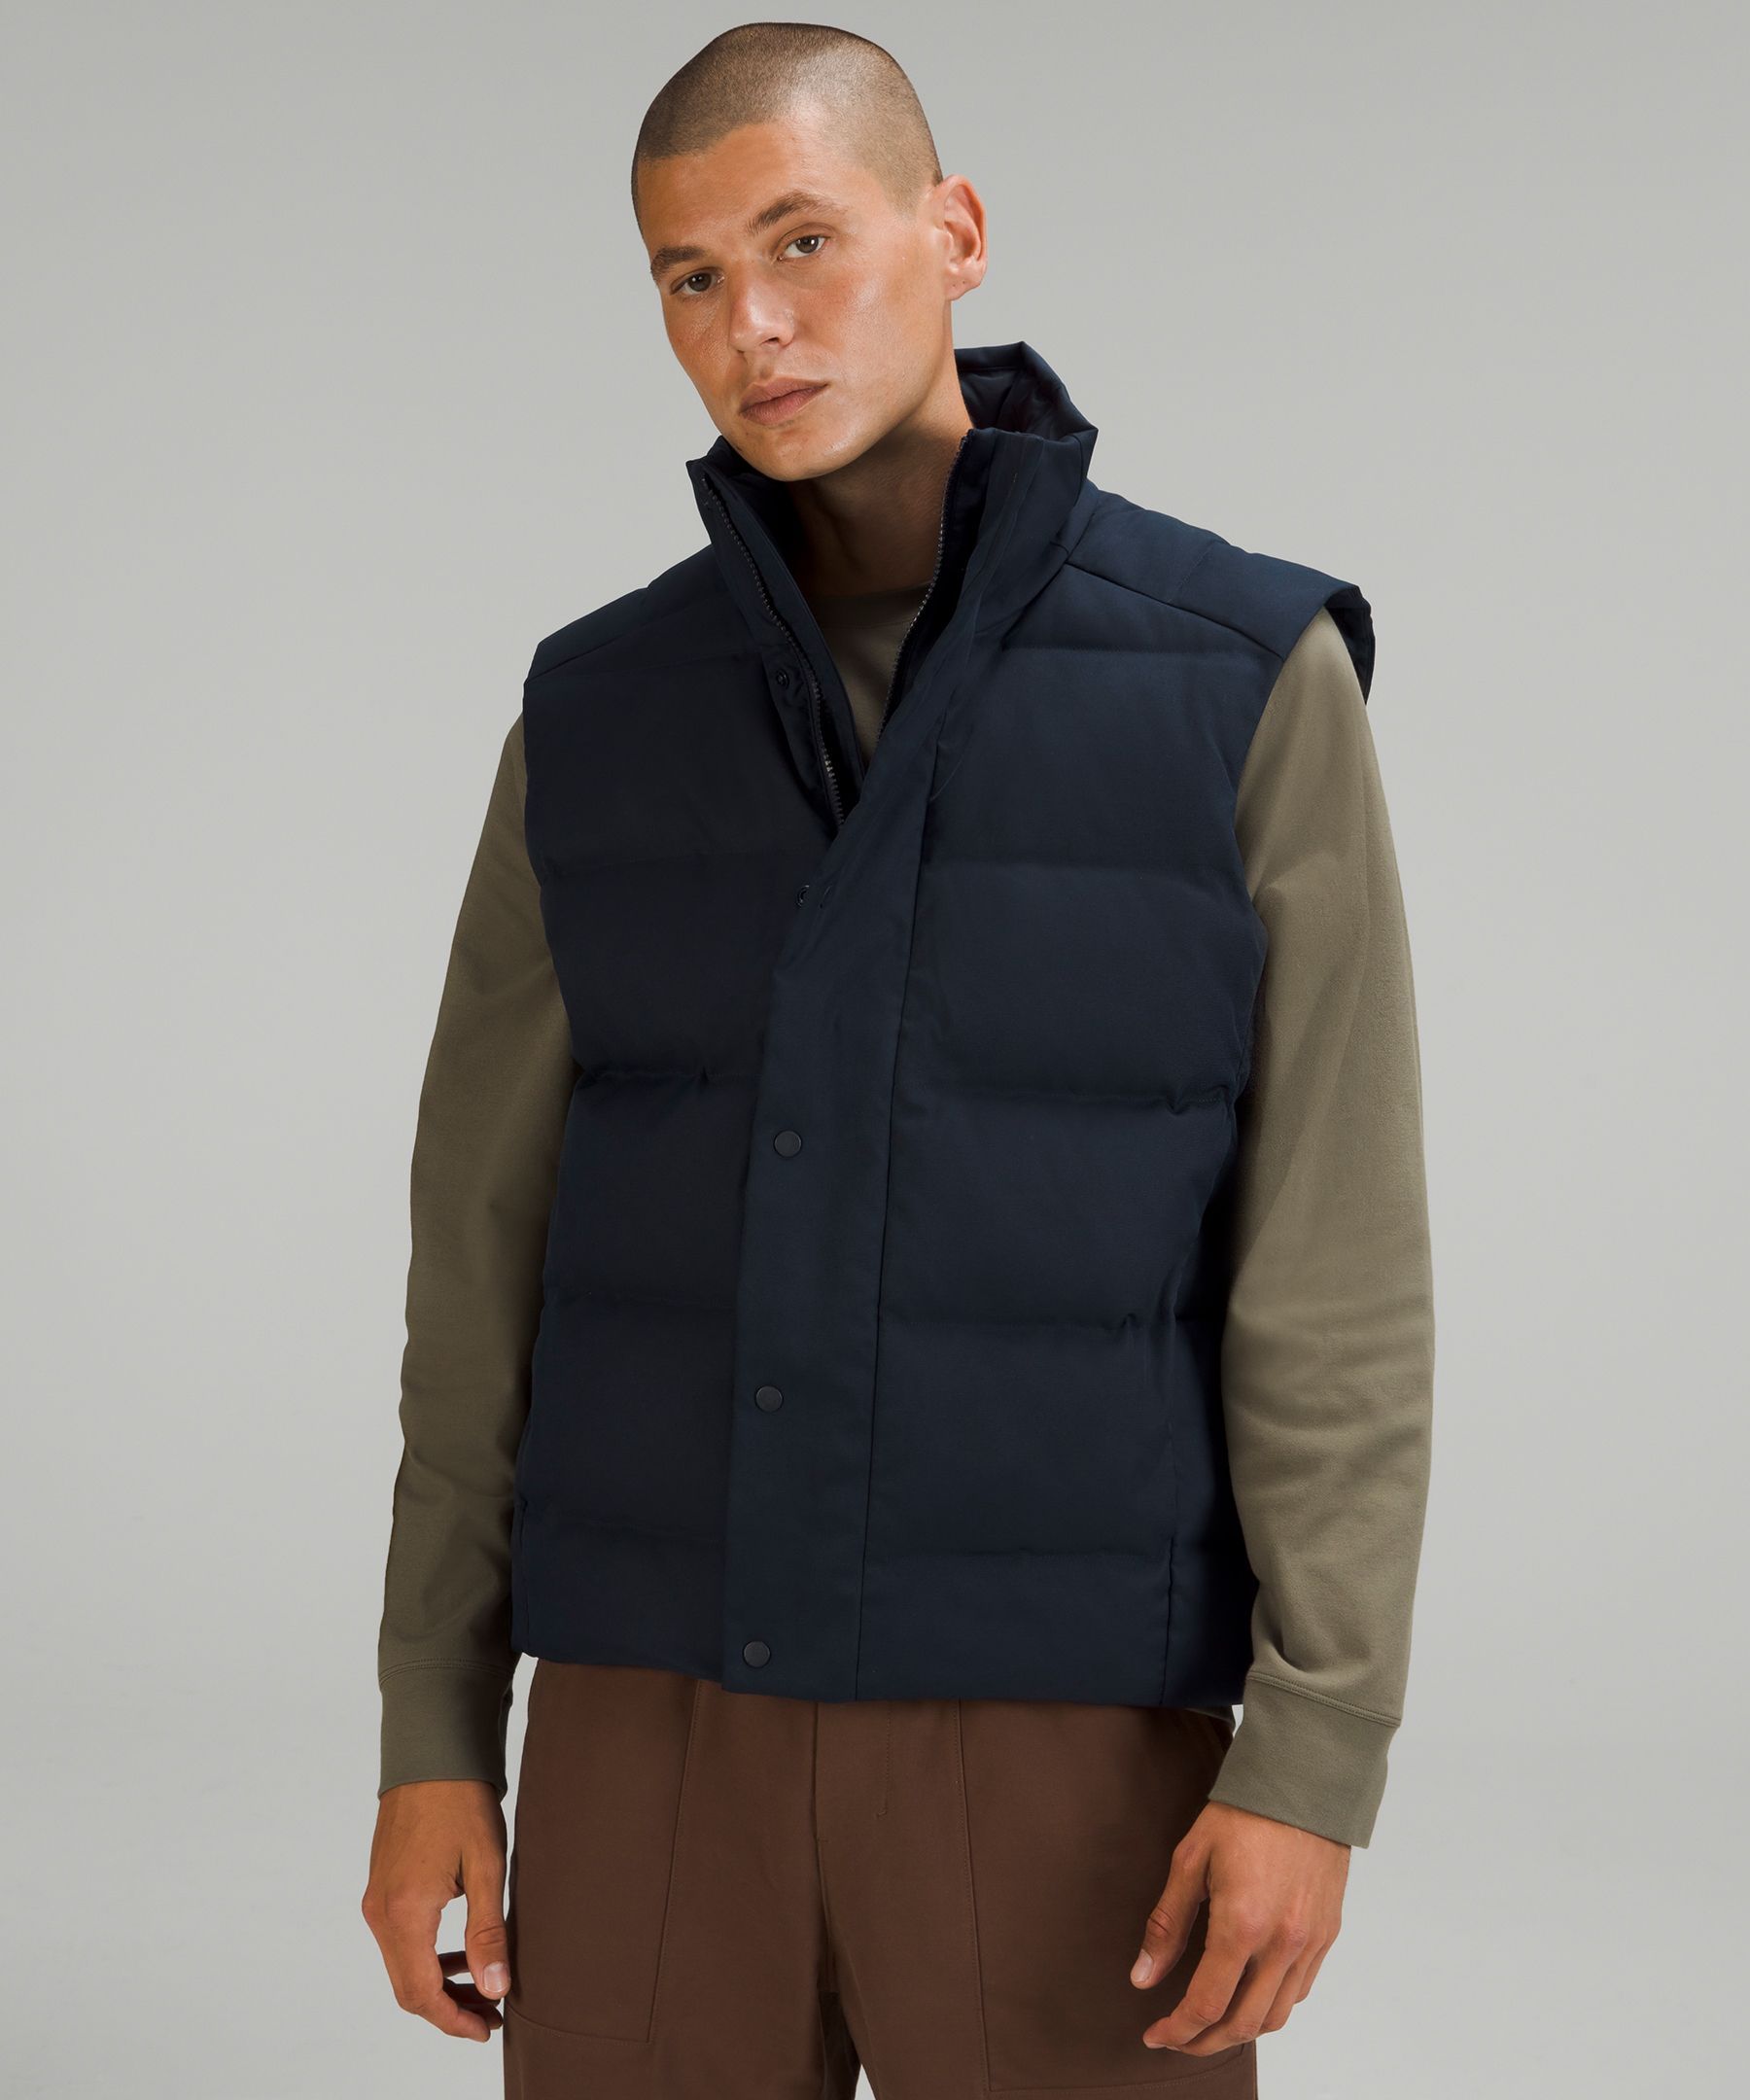 The 19 Best Puffer Vest for Men in 2022, Tested by Style Experts